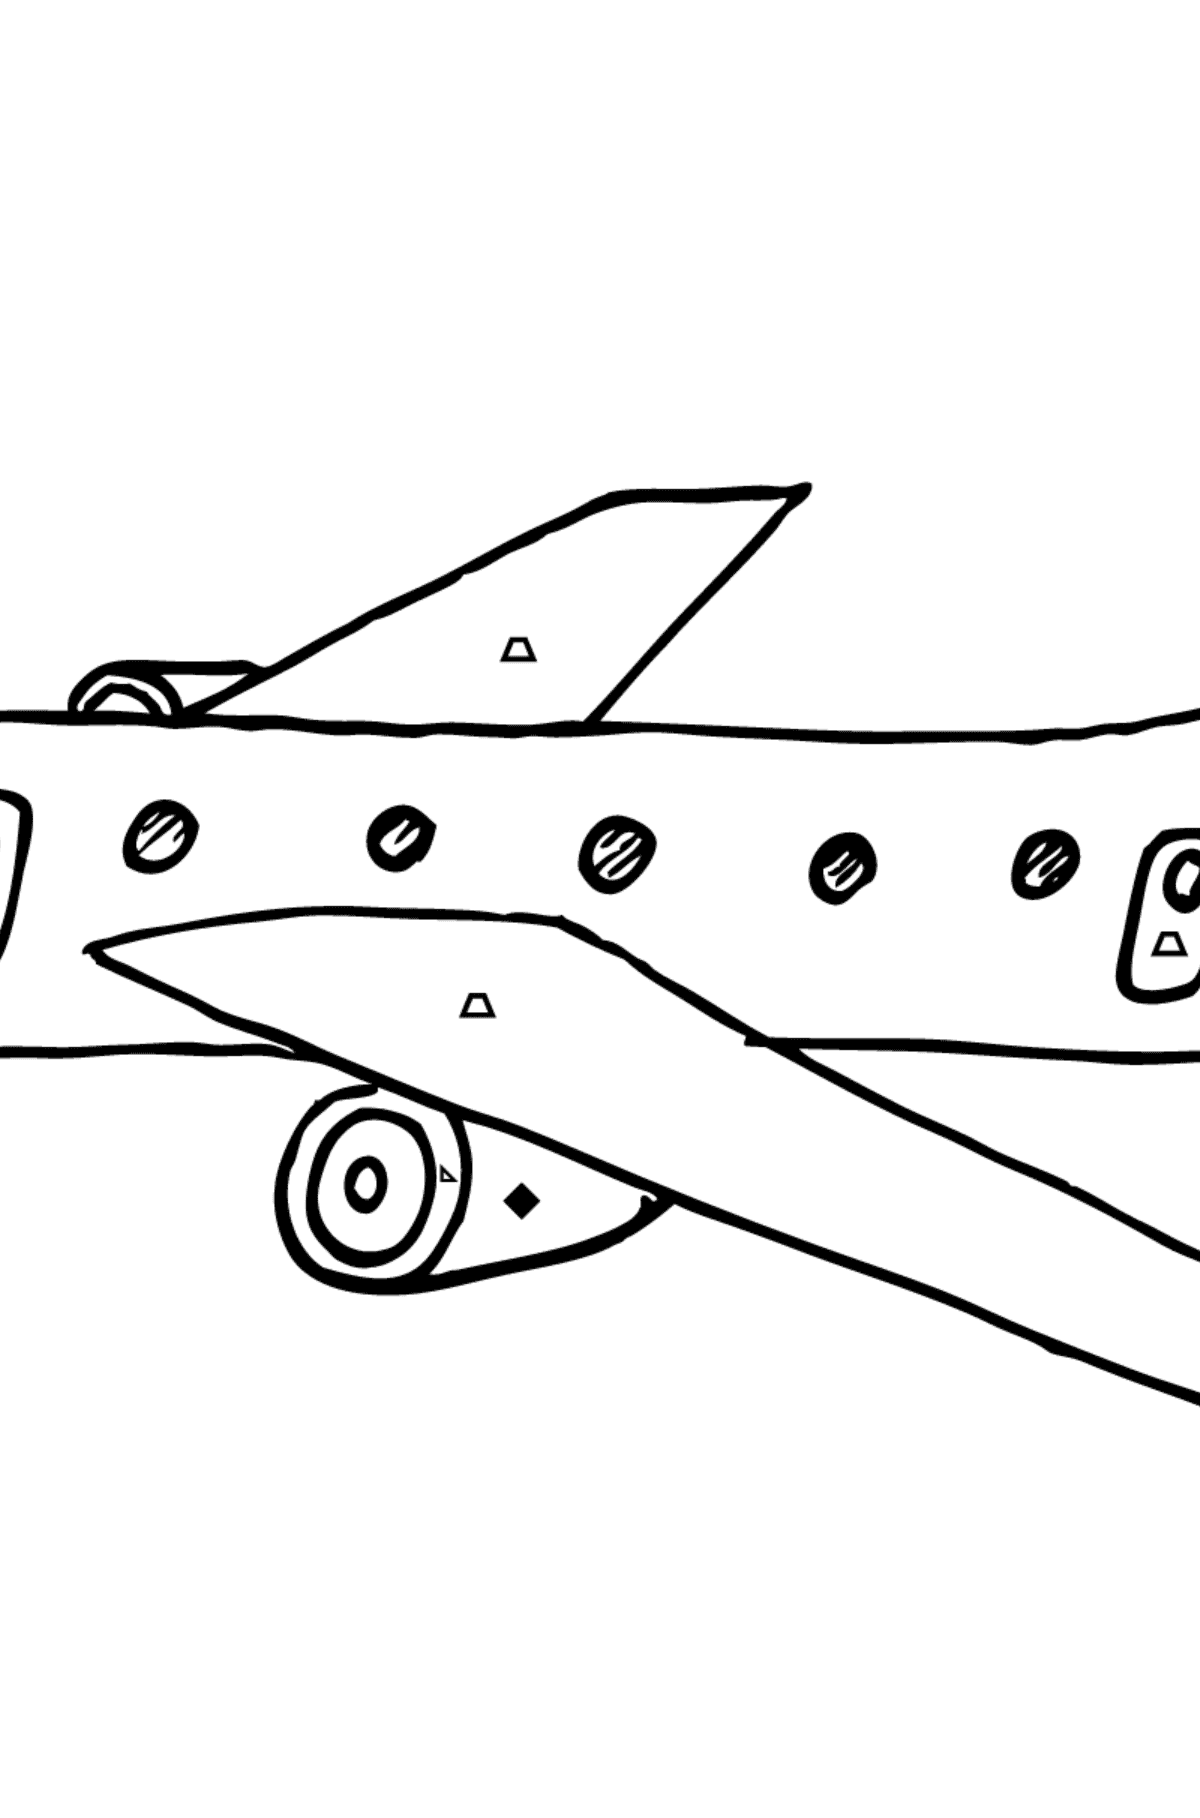 Coloring Page - A Commercial Jet - Coloring by Symbols and Geometric Shapes for Kids